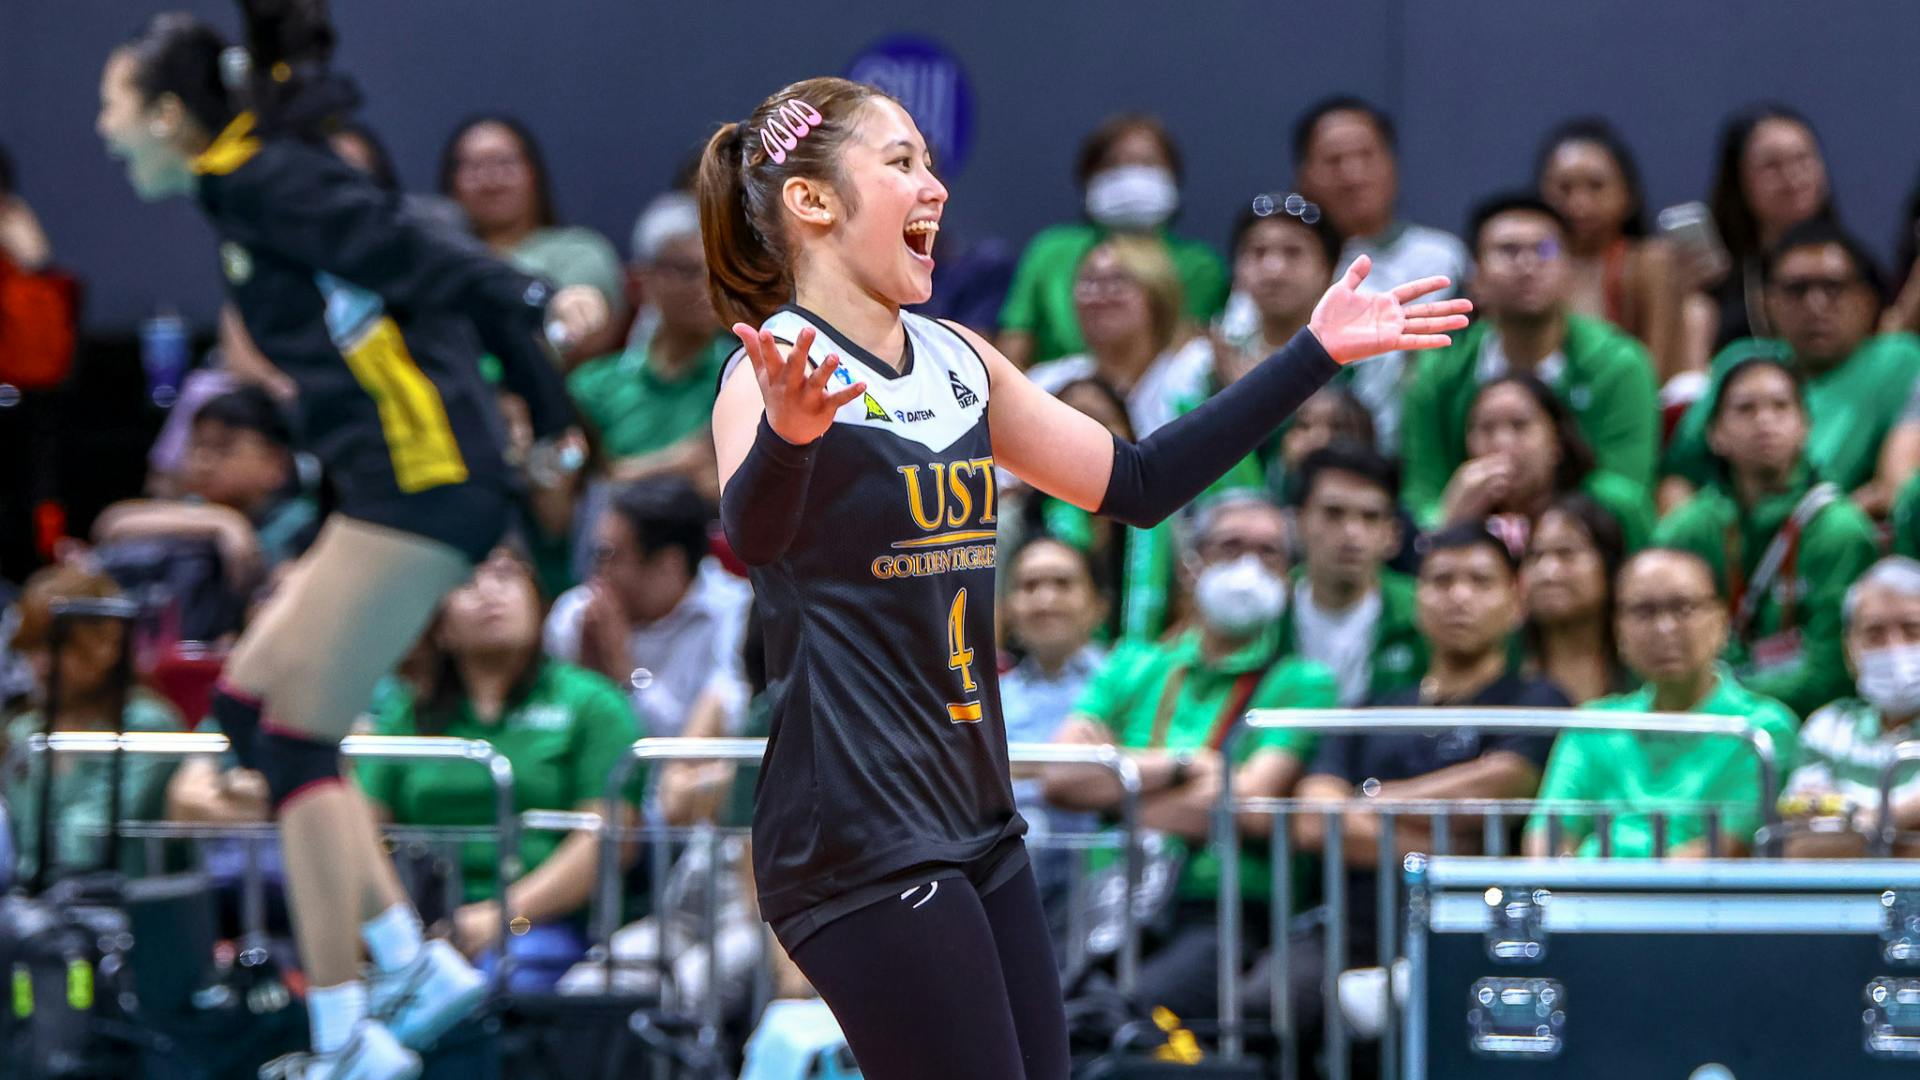 UAAP: UST sends strong statement with five-set conquest of champion La Salle